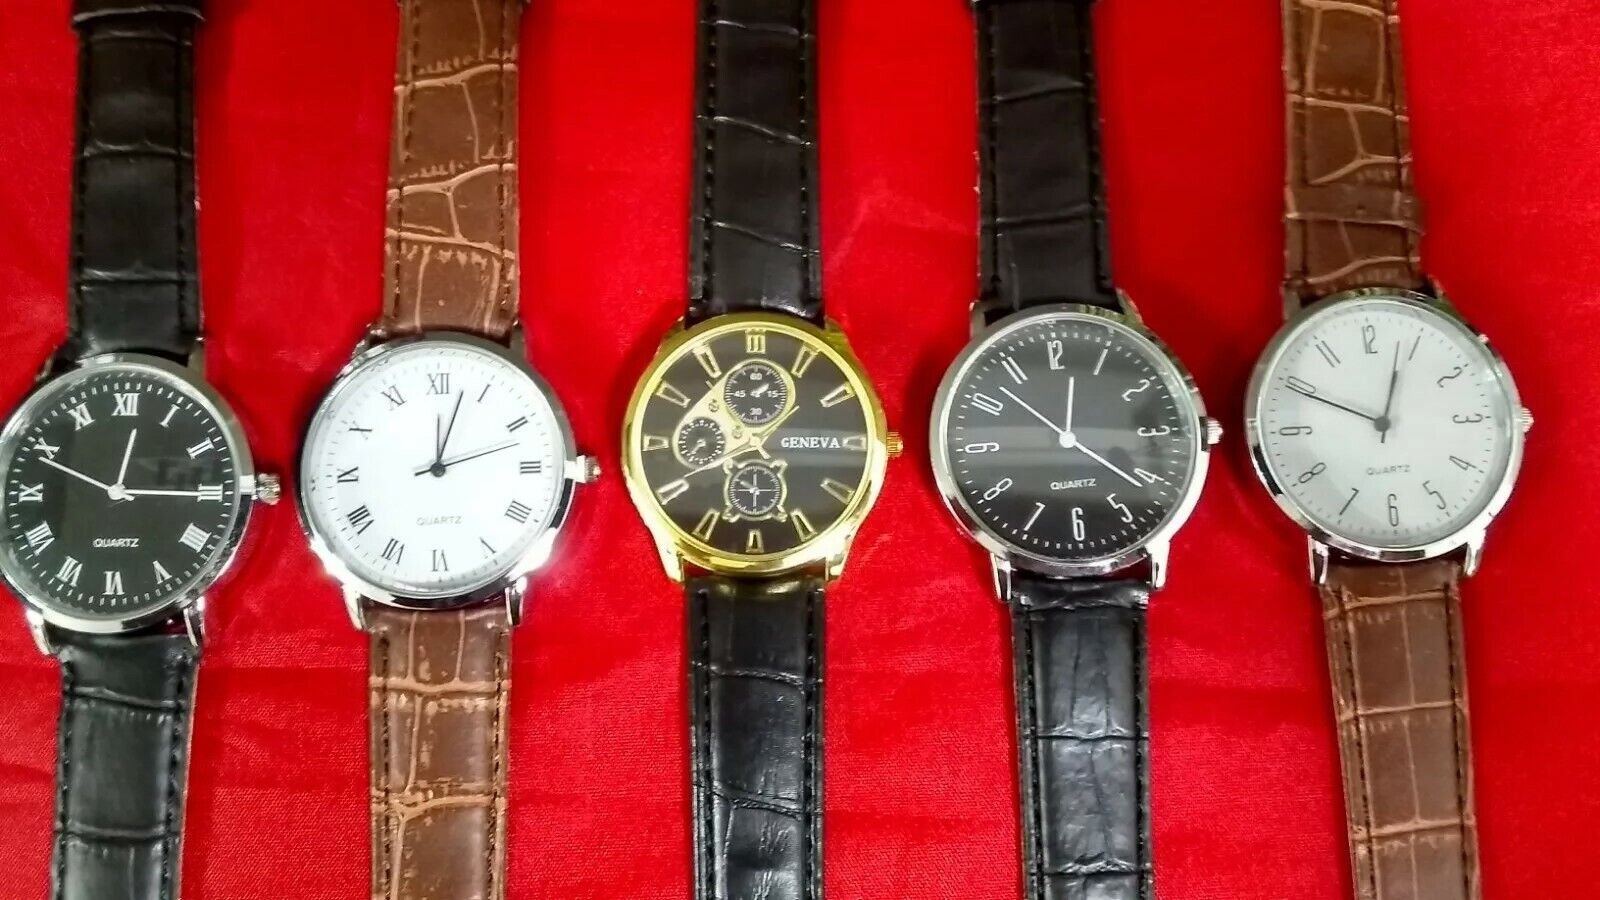 5 Brand NEW Men's Watches 10 FREE SPARE BATTERIES lot Watch  # 43211234 Unbranded